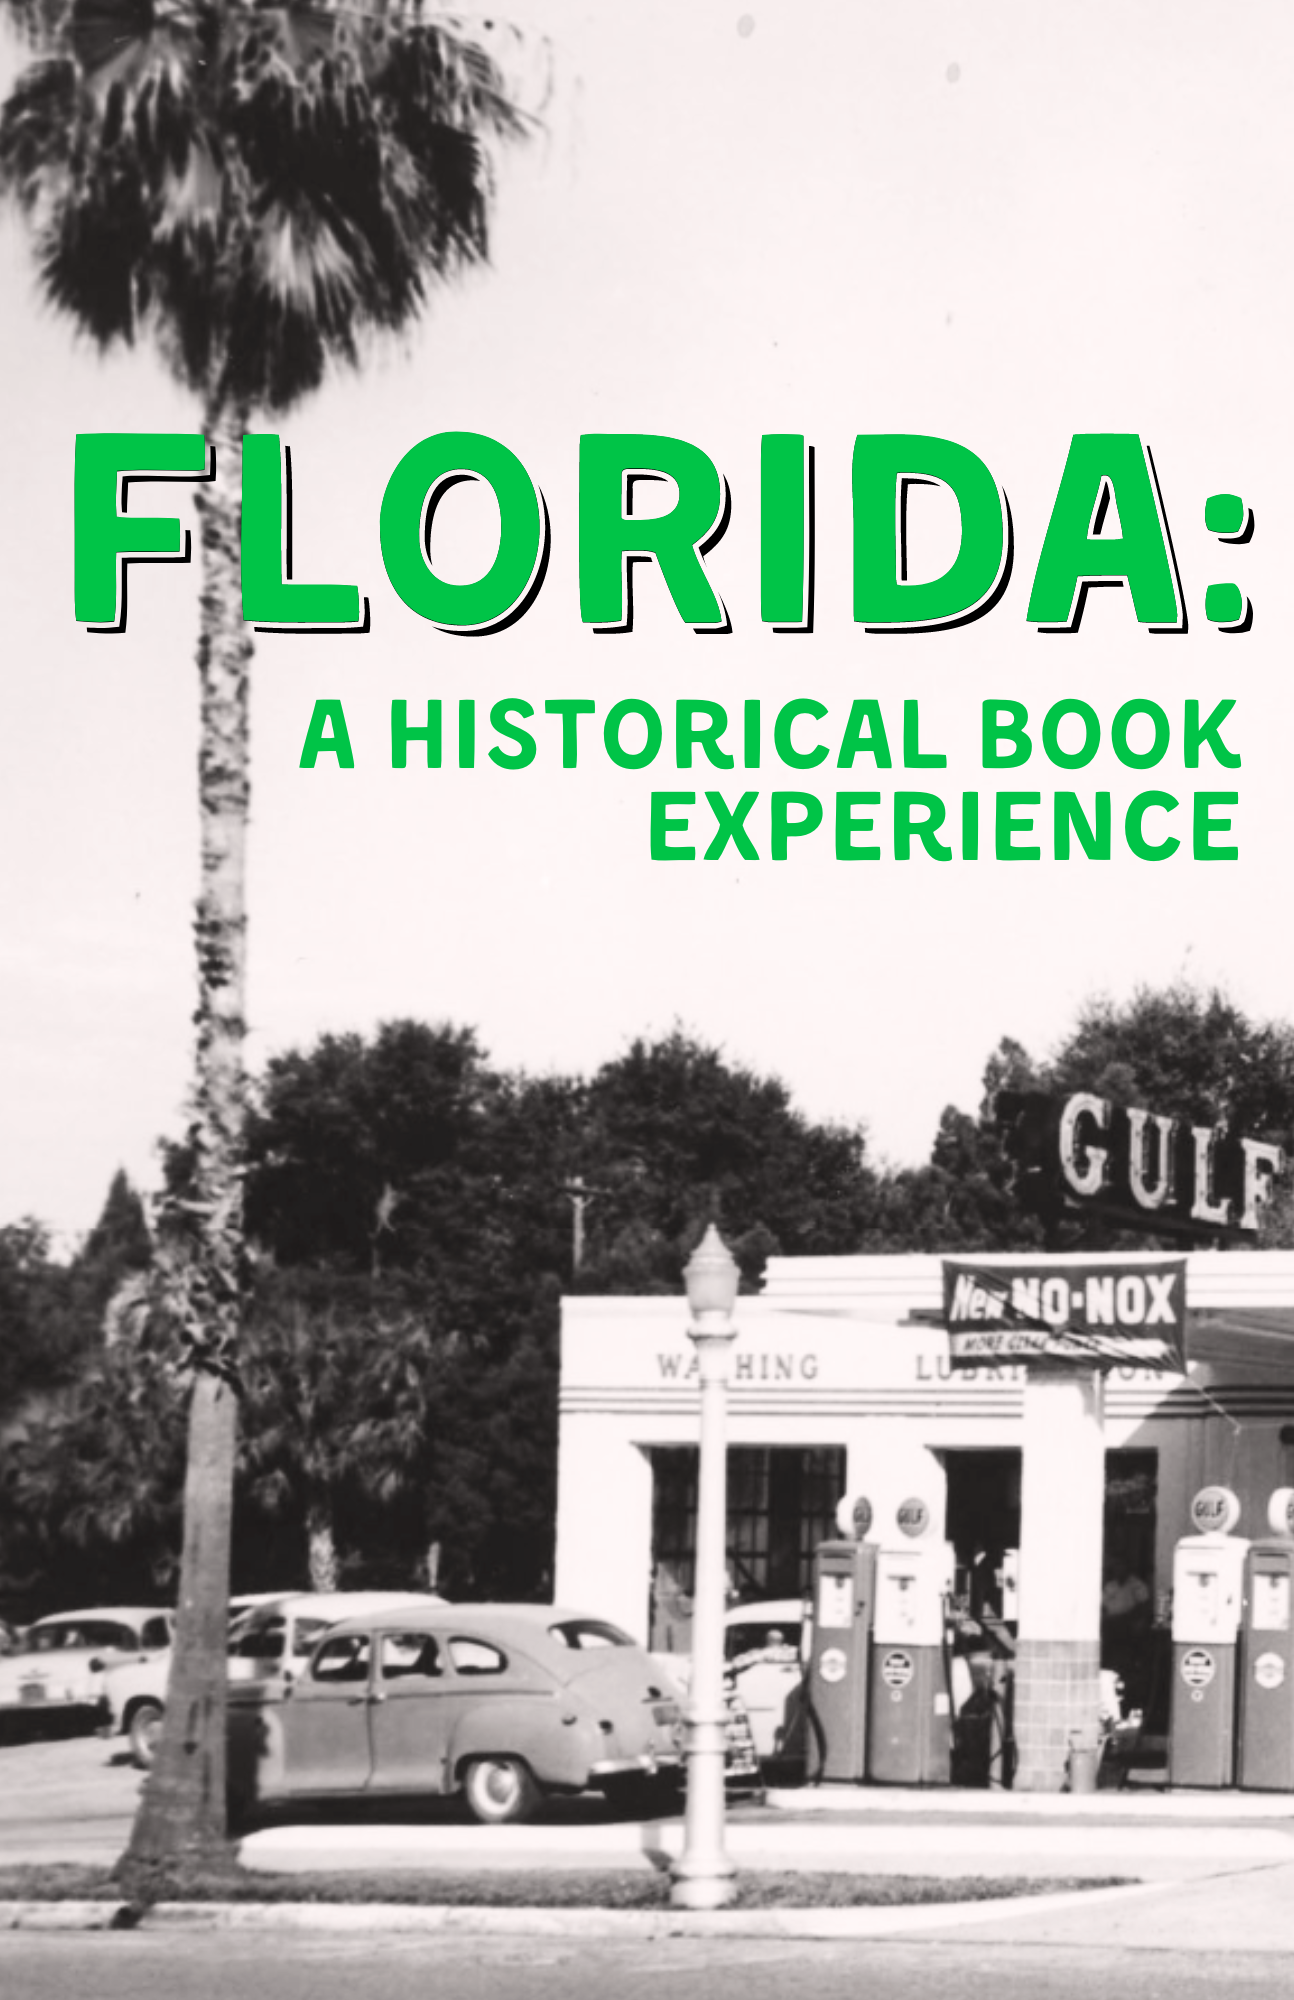 A historical Book Experience Title Over 1940s Service Station Picture